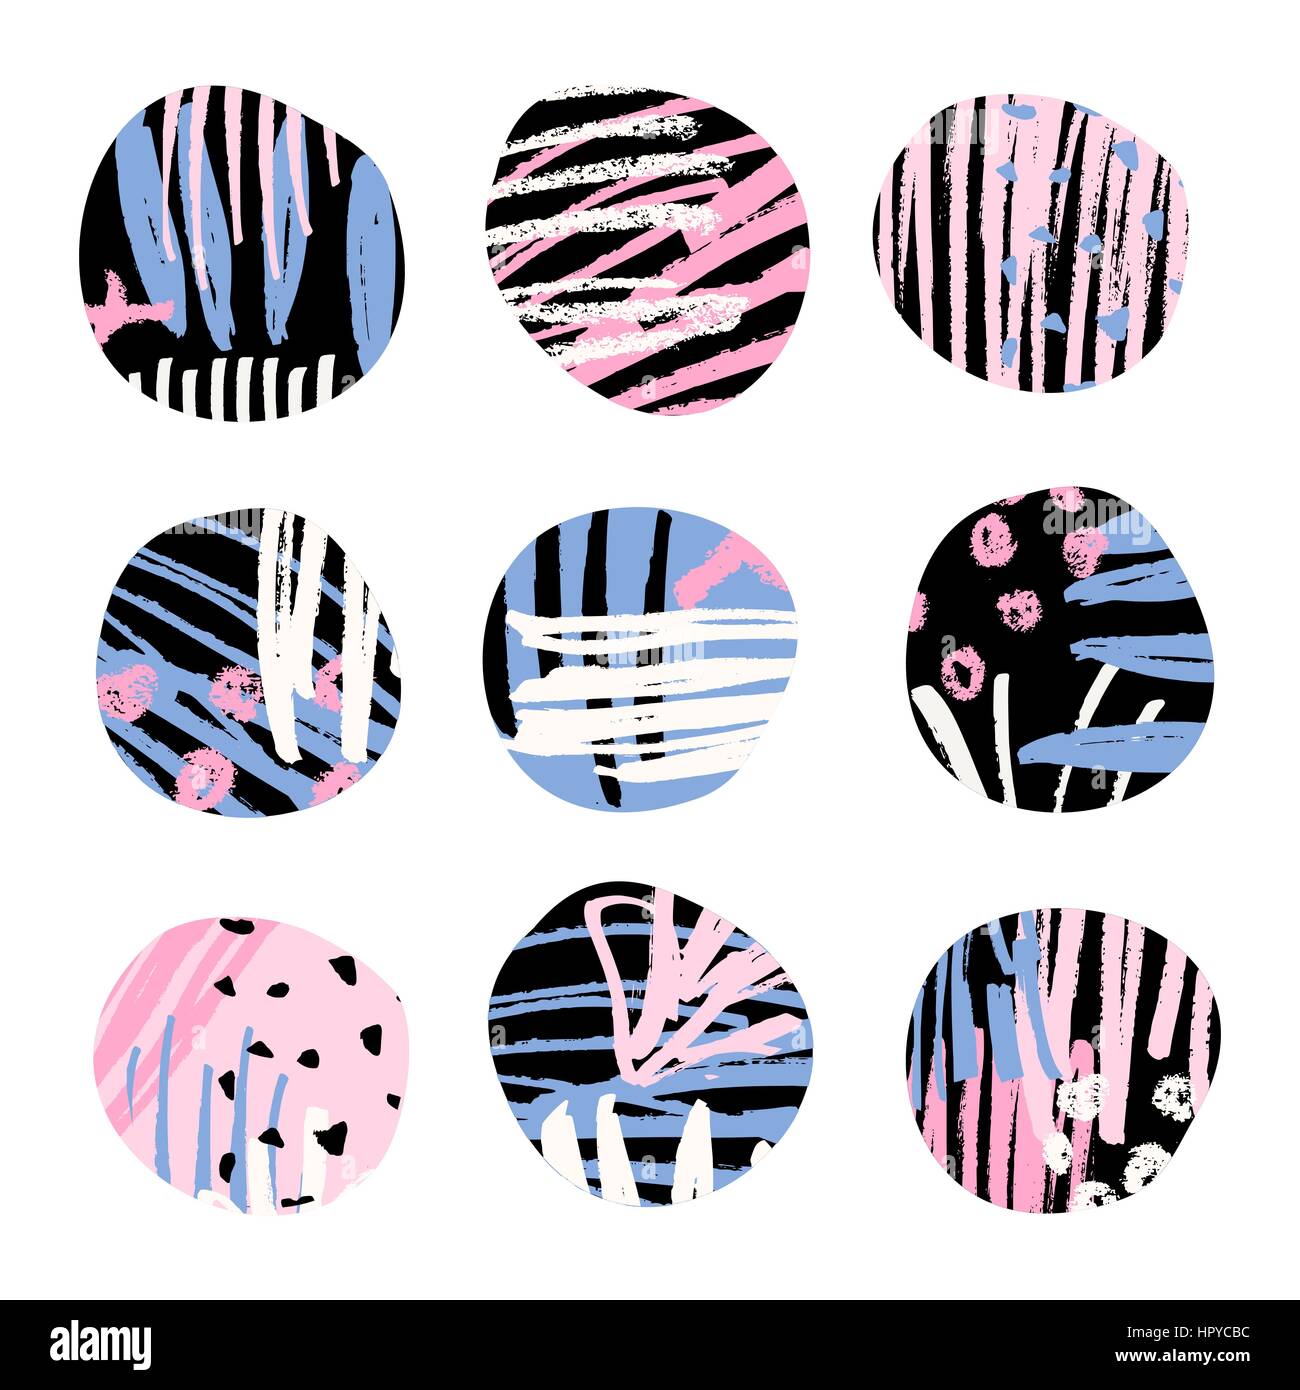 A set of textured round shapes in black, blue and pink, isolated on white background. Stock Vector